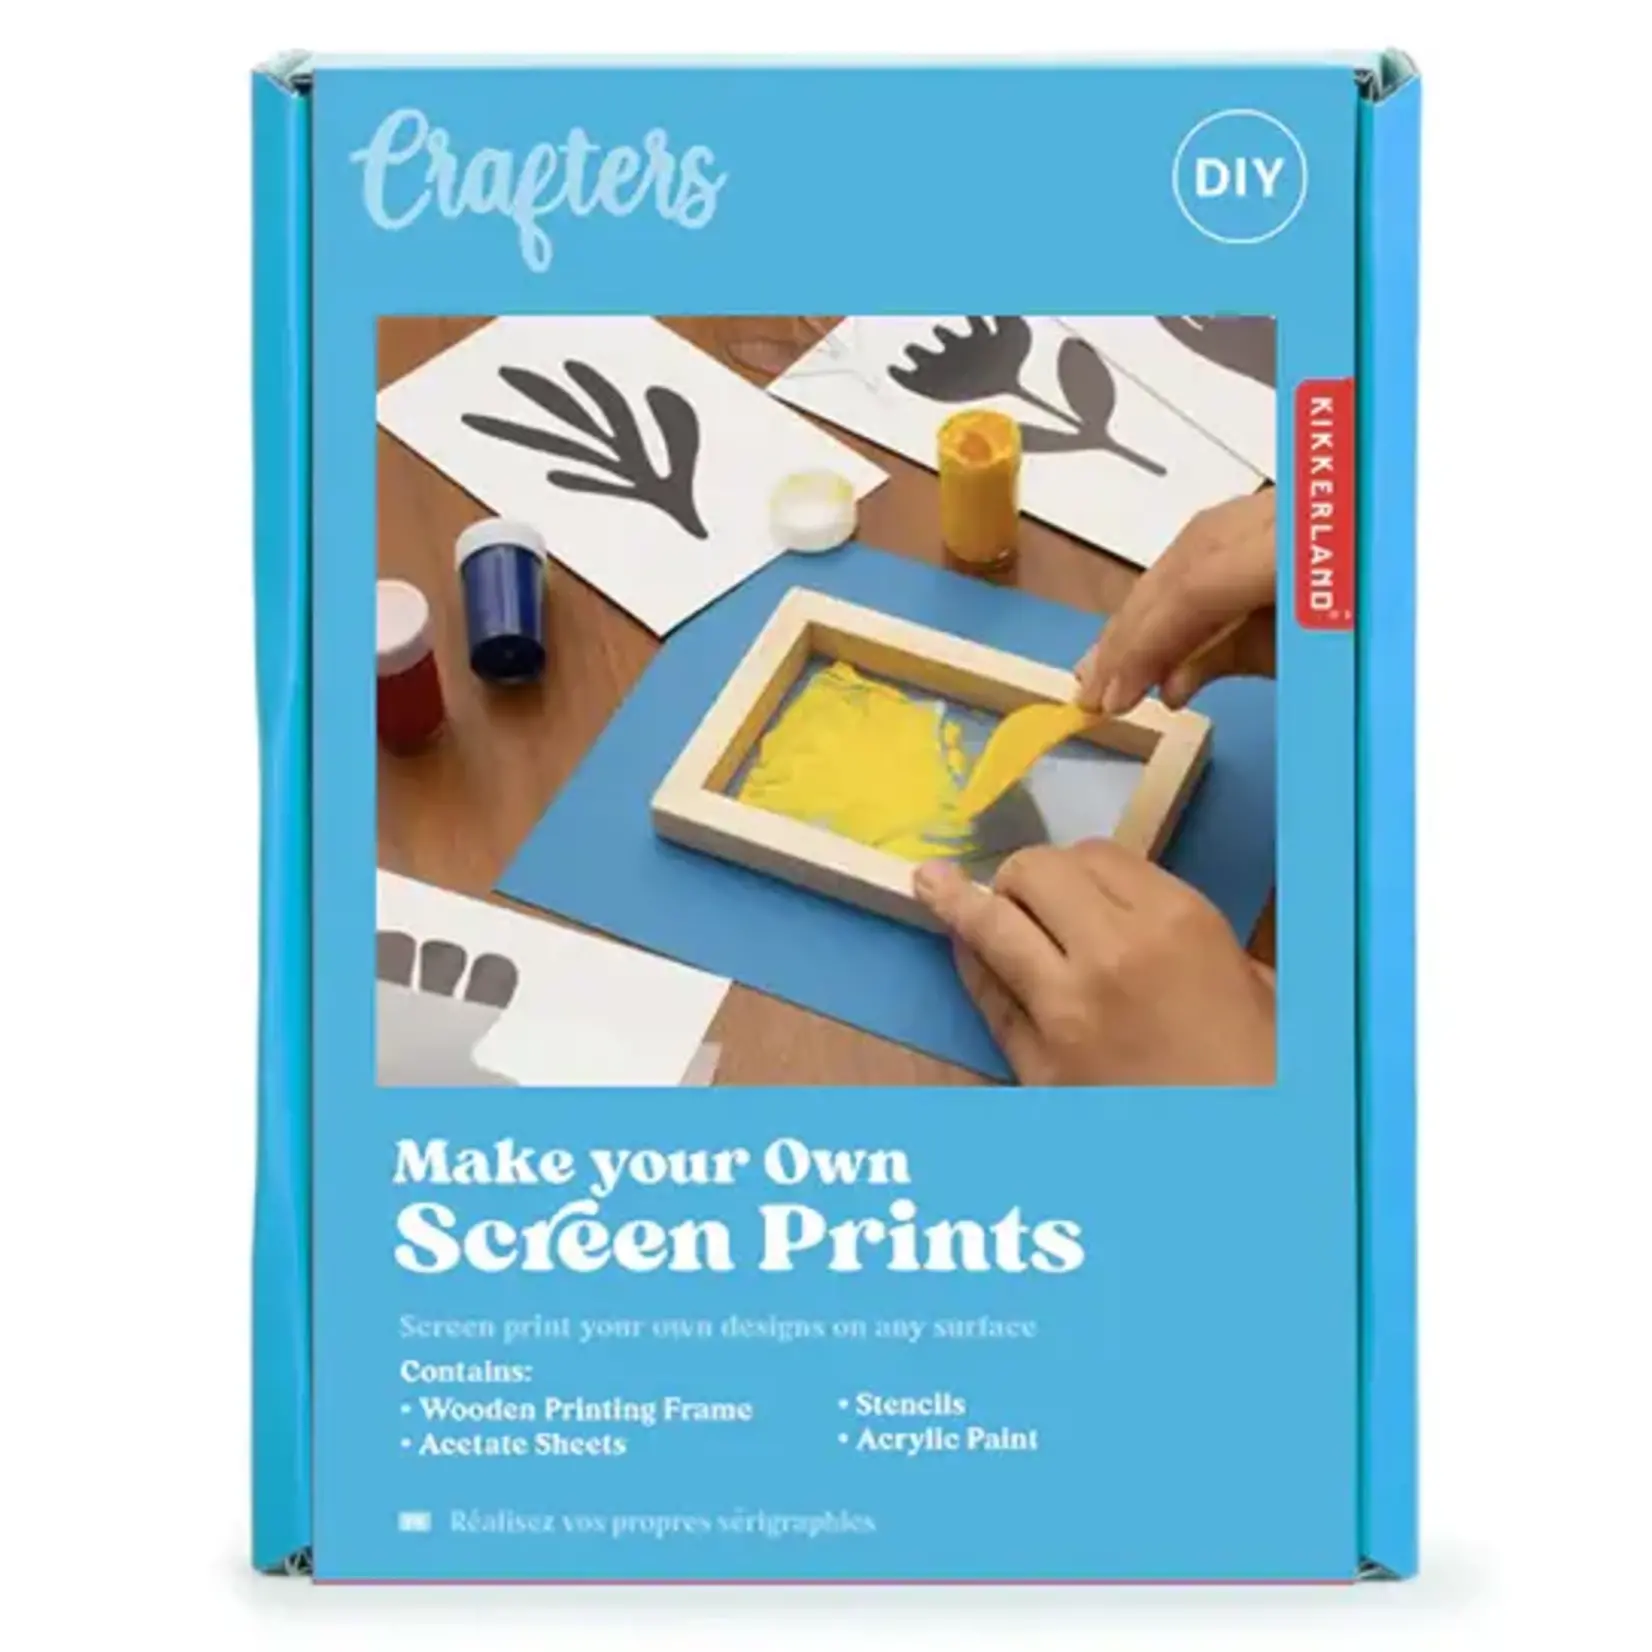 KIKKERLAND DESIGN CRAFTERS MAKE YOUR OWN SCREEN PRINTS